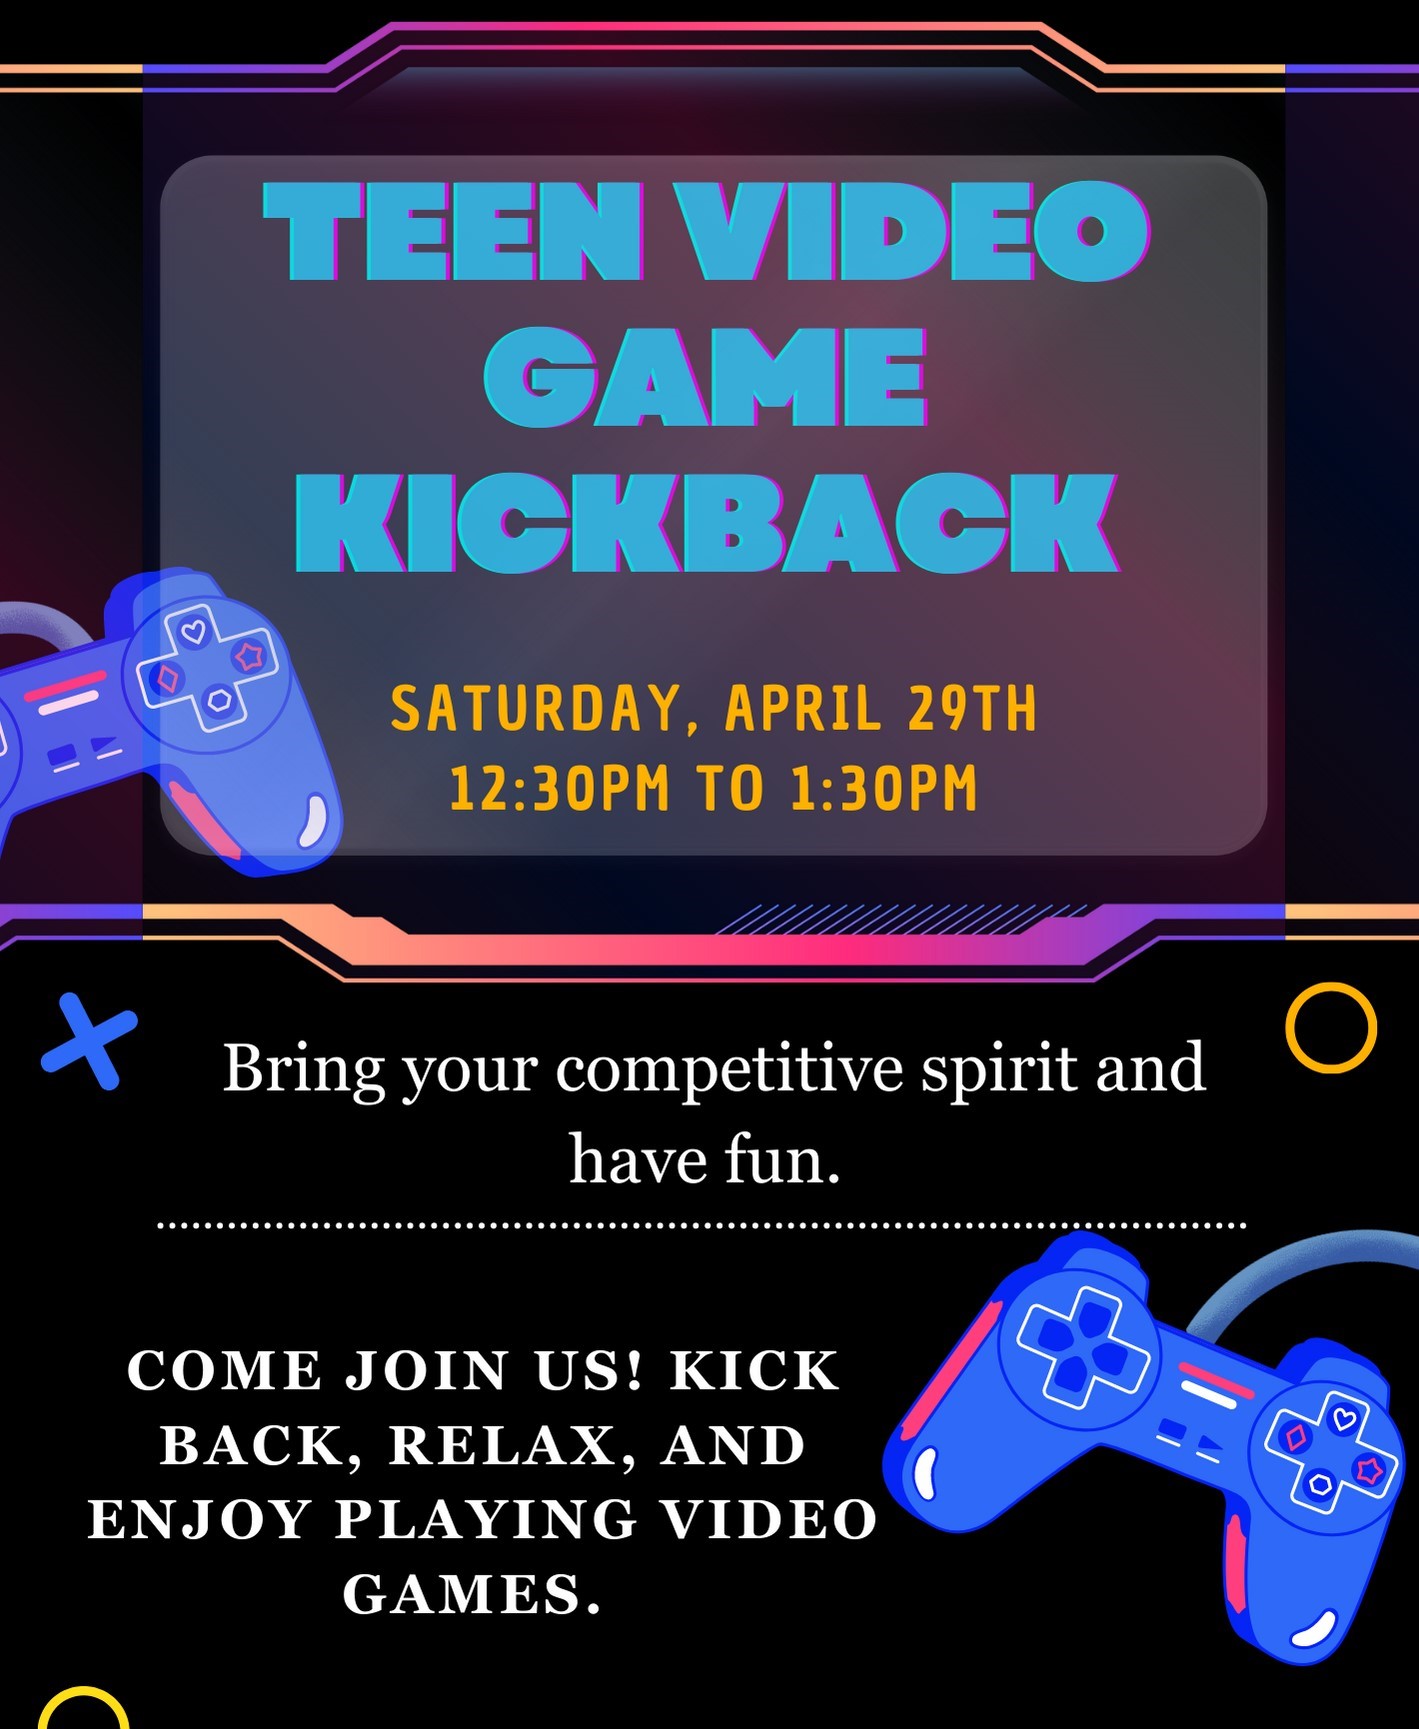 Teen Video Game Kickback - Come join us! Kick back, relax, and enjoy playing video games. 